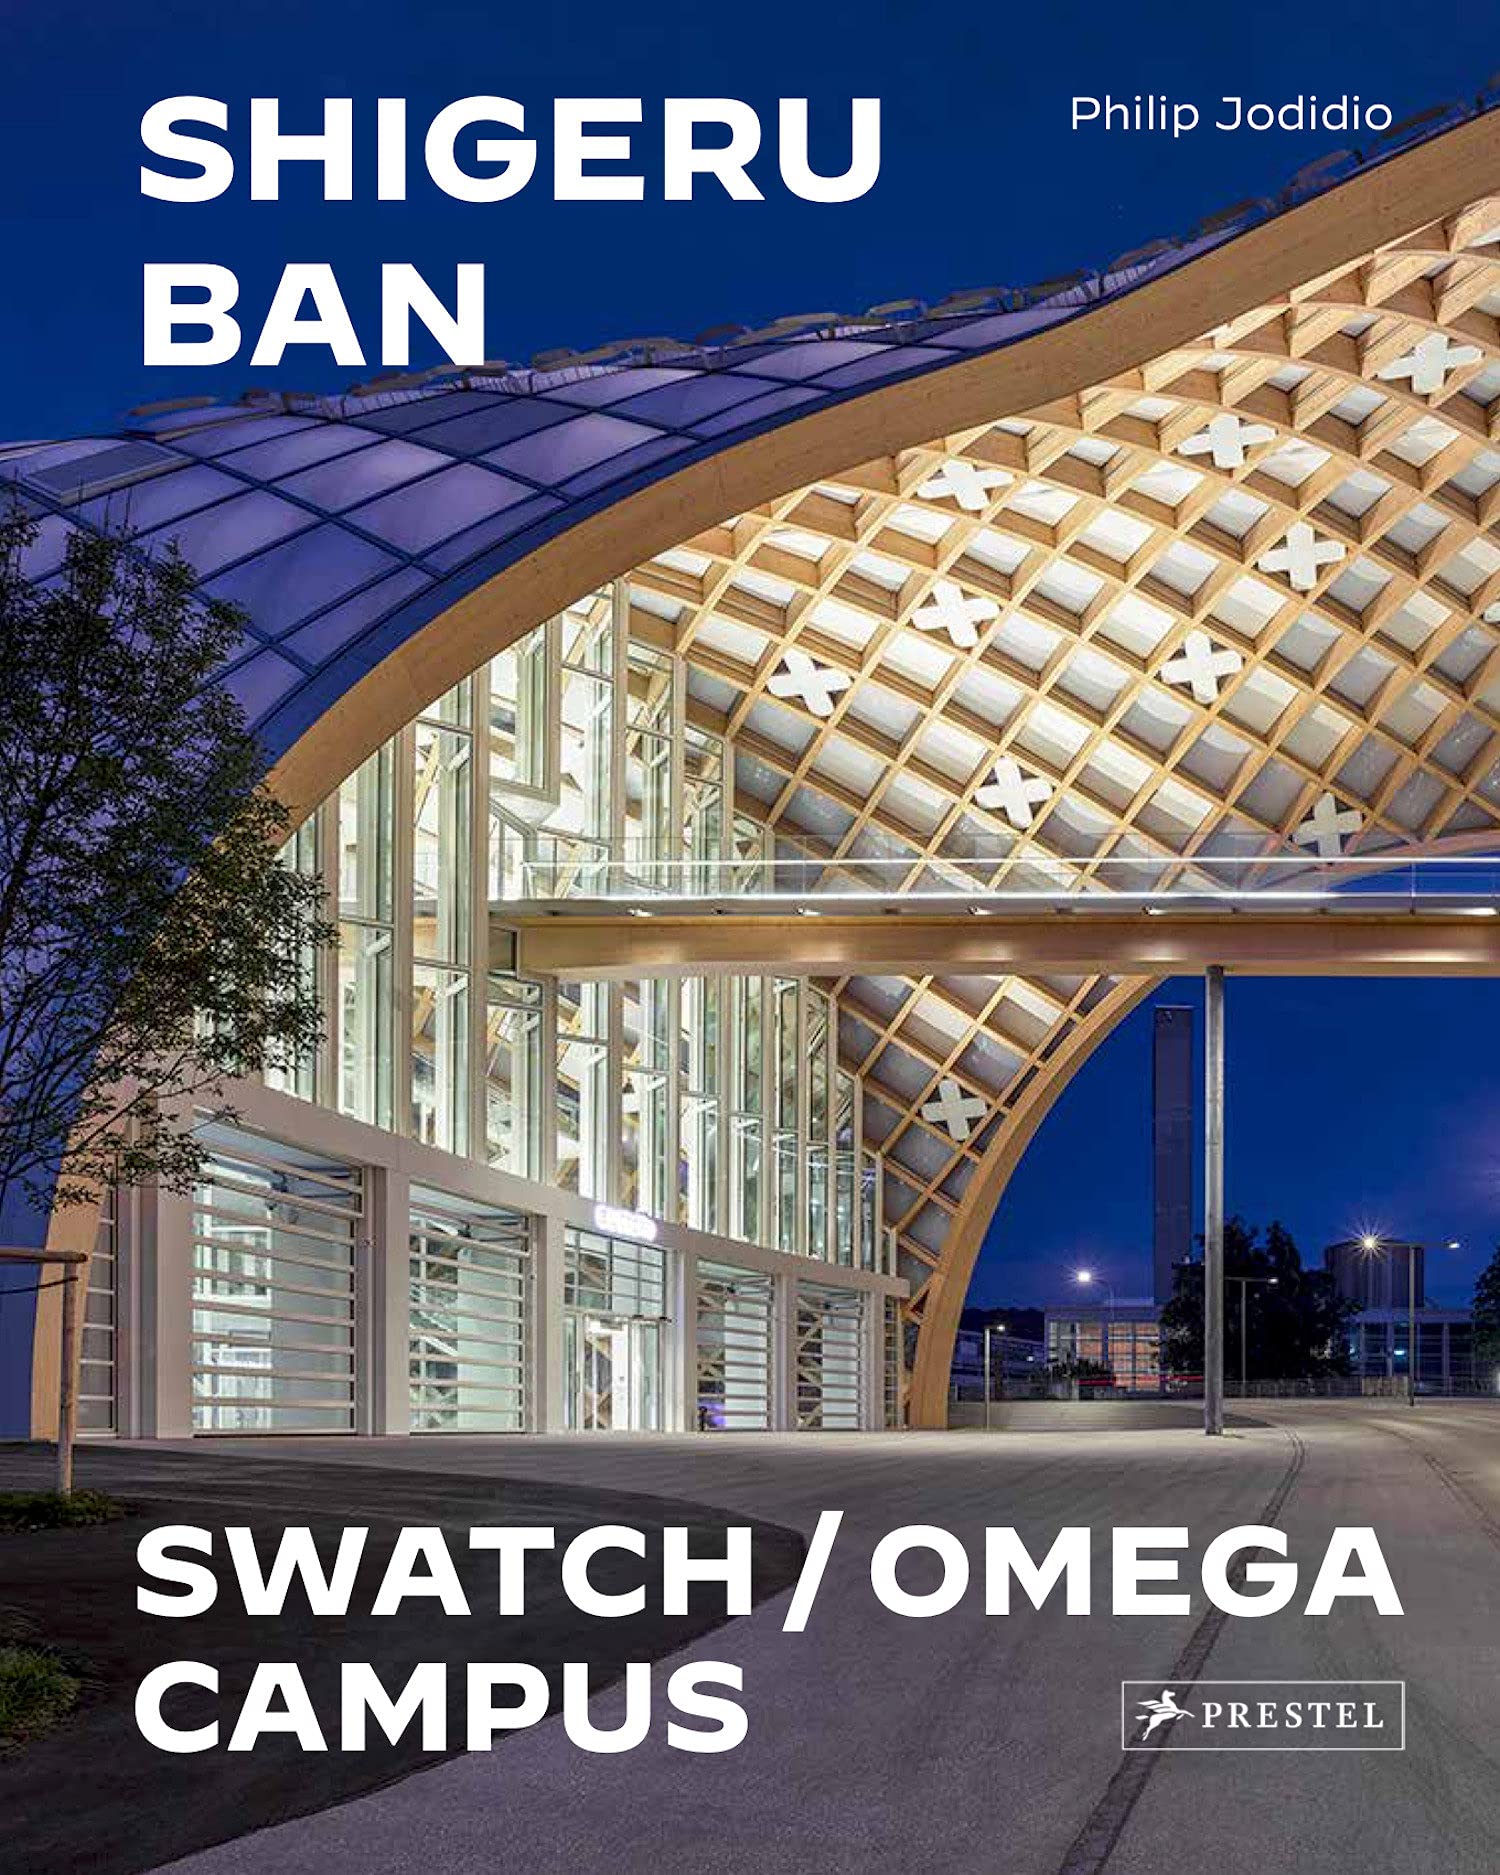 Swatch/Omega Campus